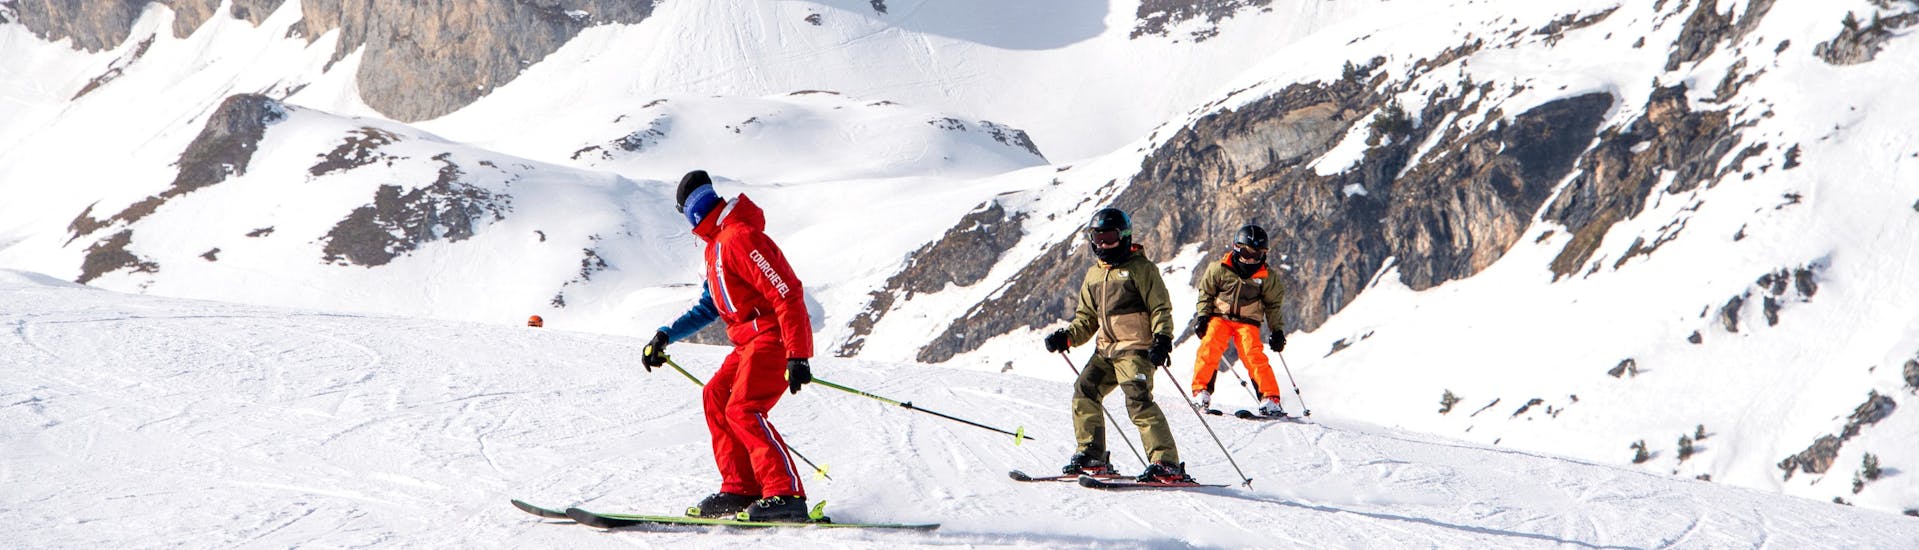 Skiers are following their instructor during their Private Ski Lessons for Kids of All Ages with ESF Courchevel 1650 - Moriond.